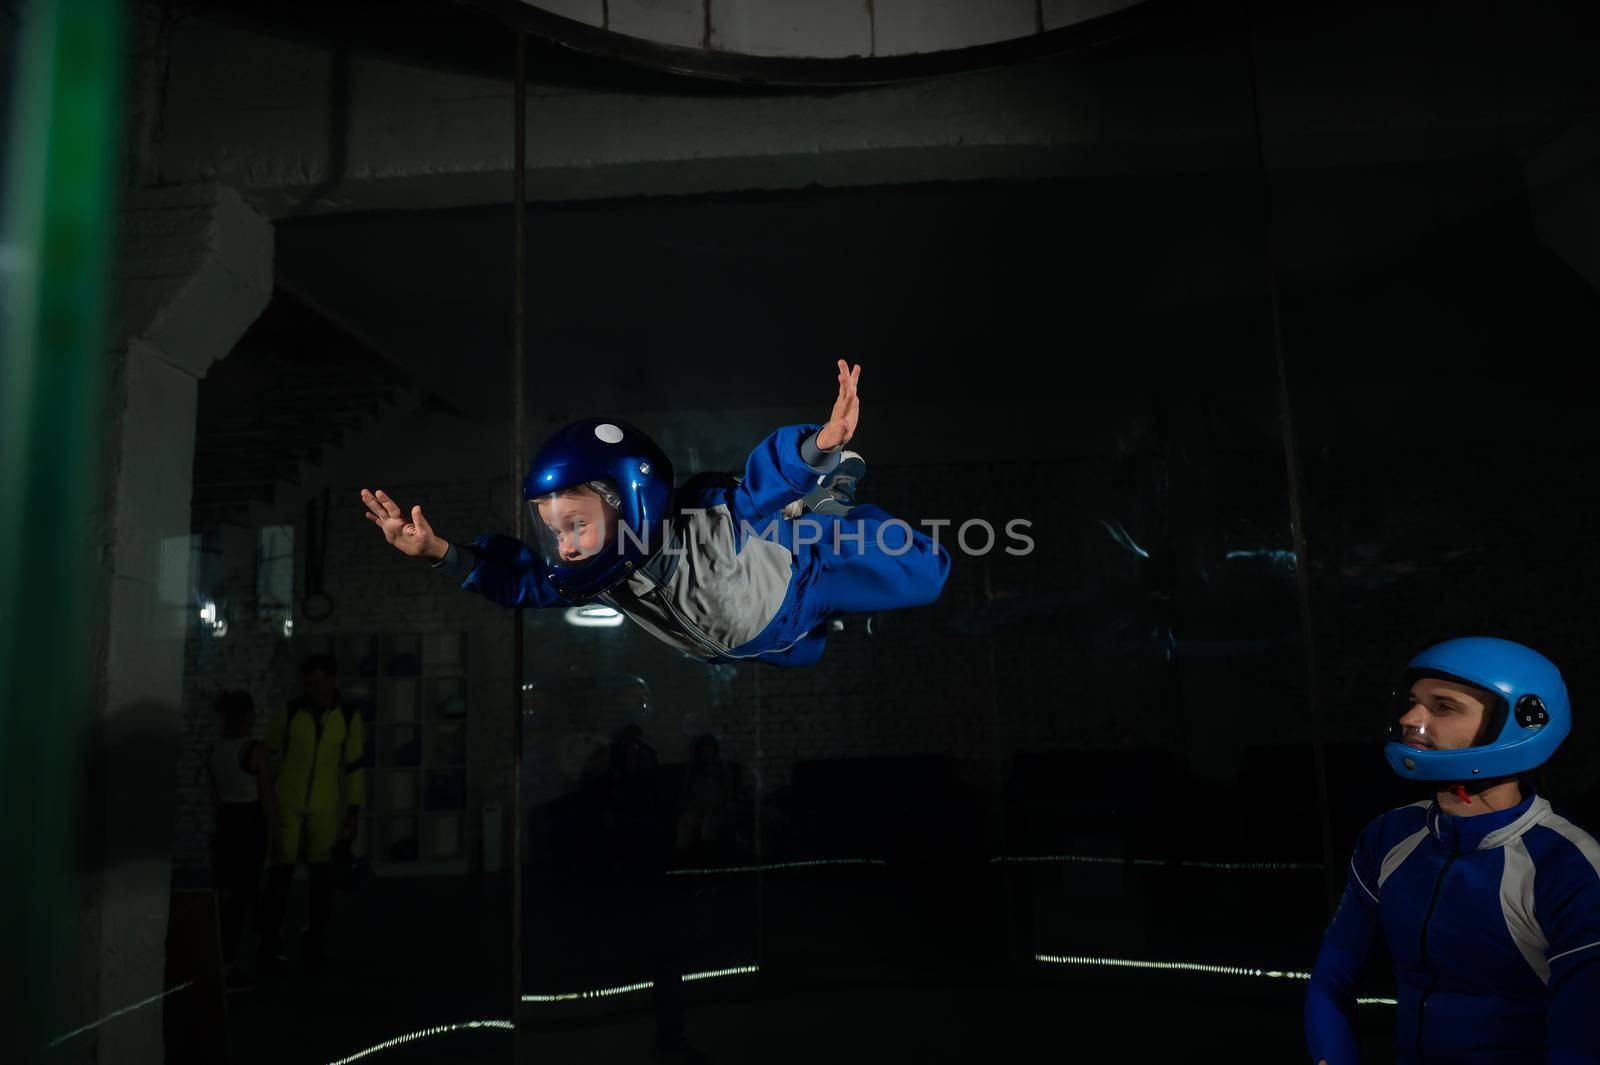 A man teaches a boy to fly in a wind tunnel